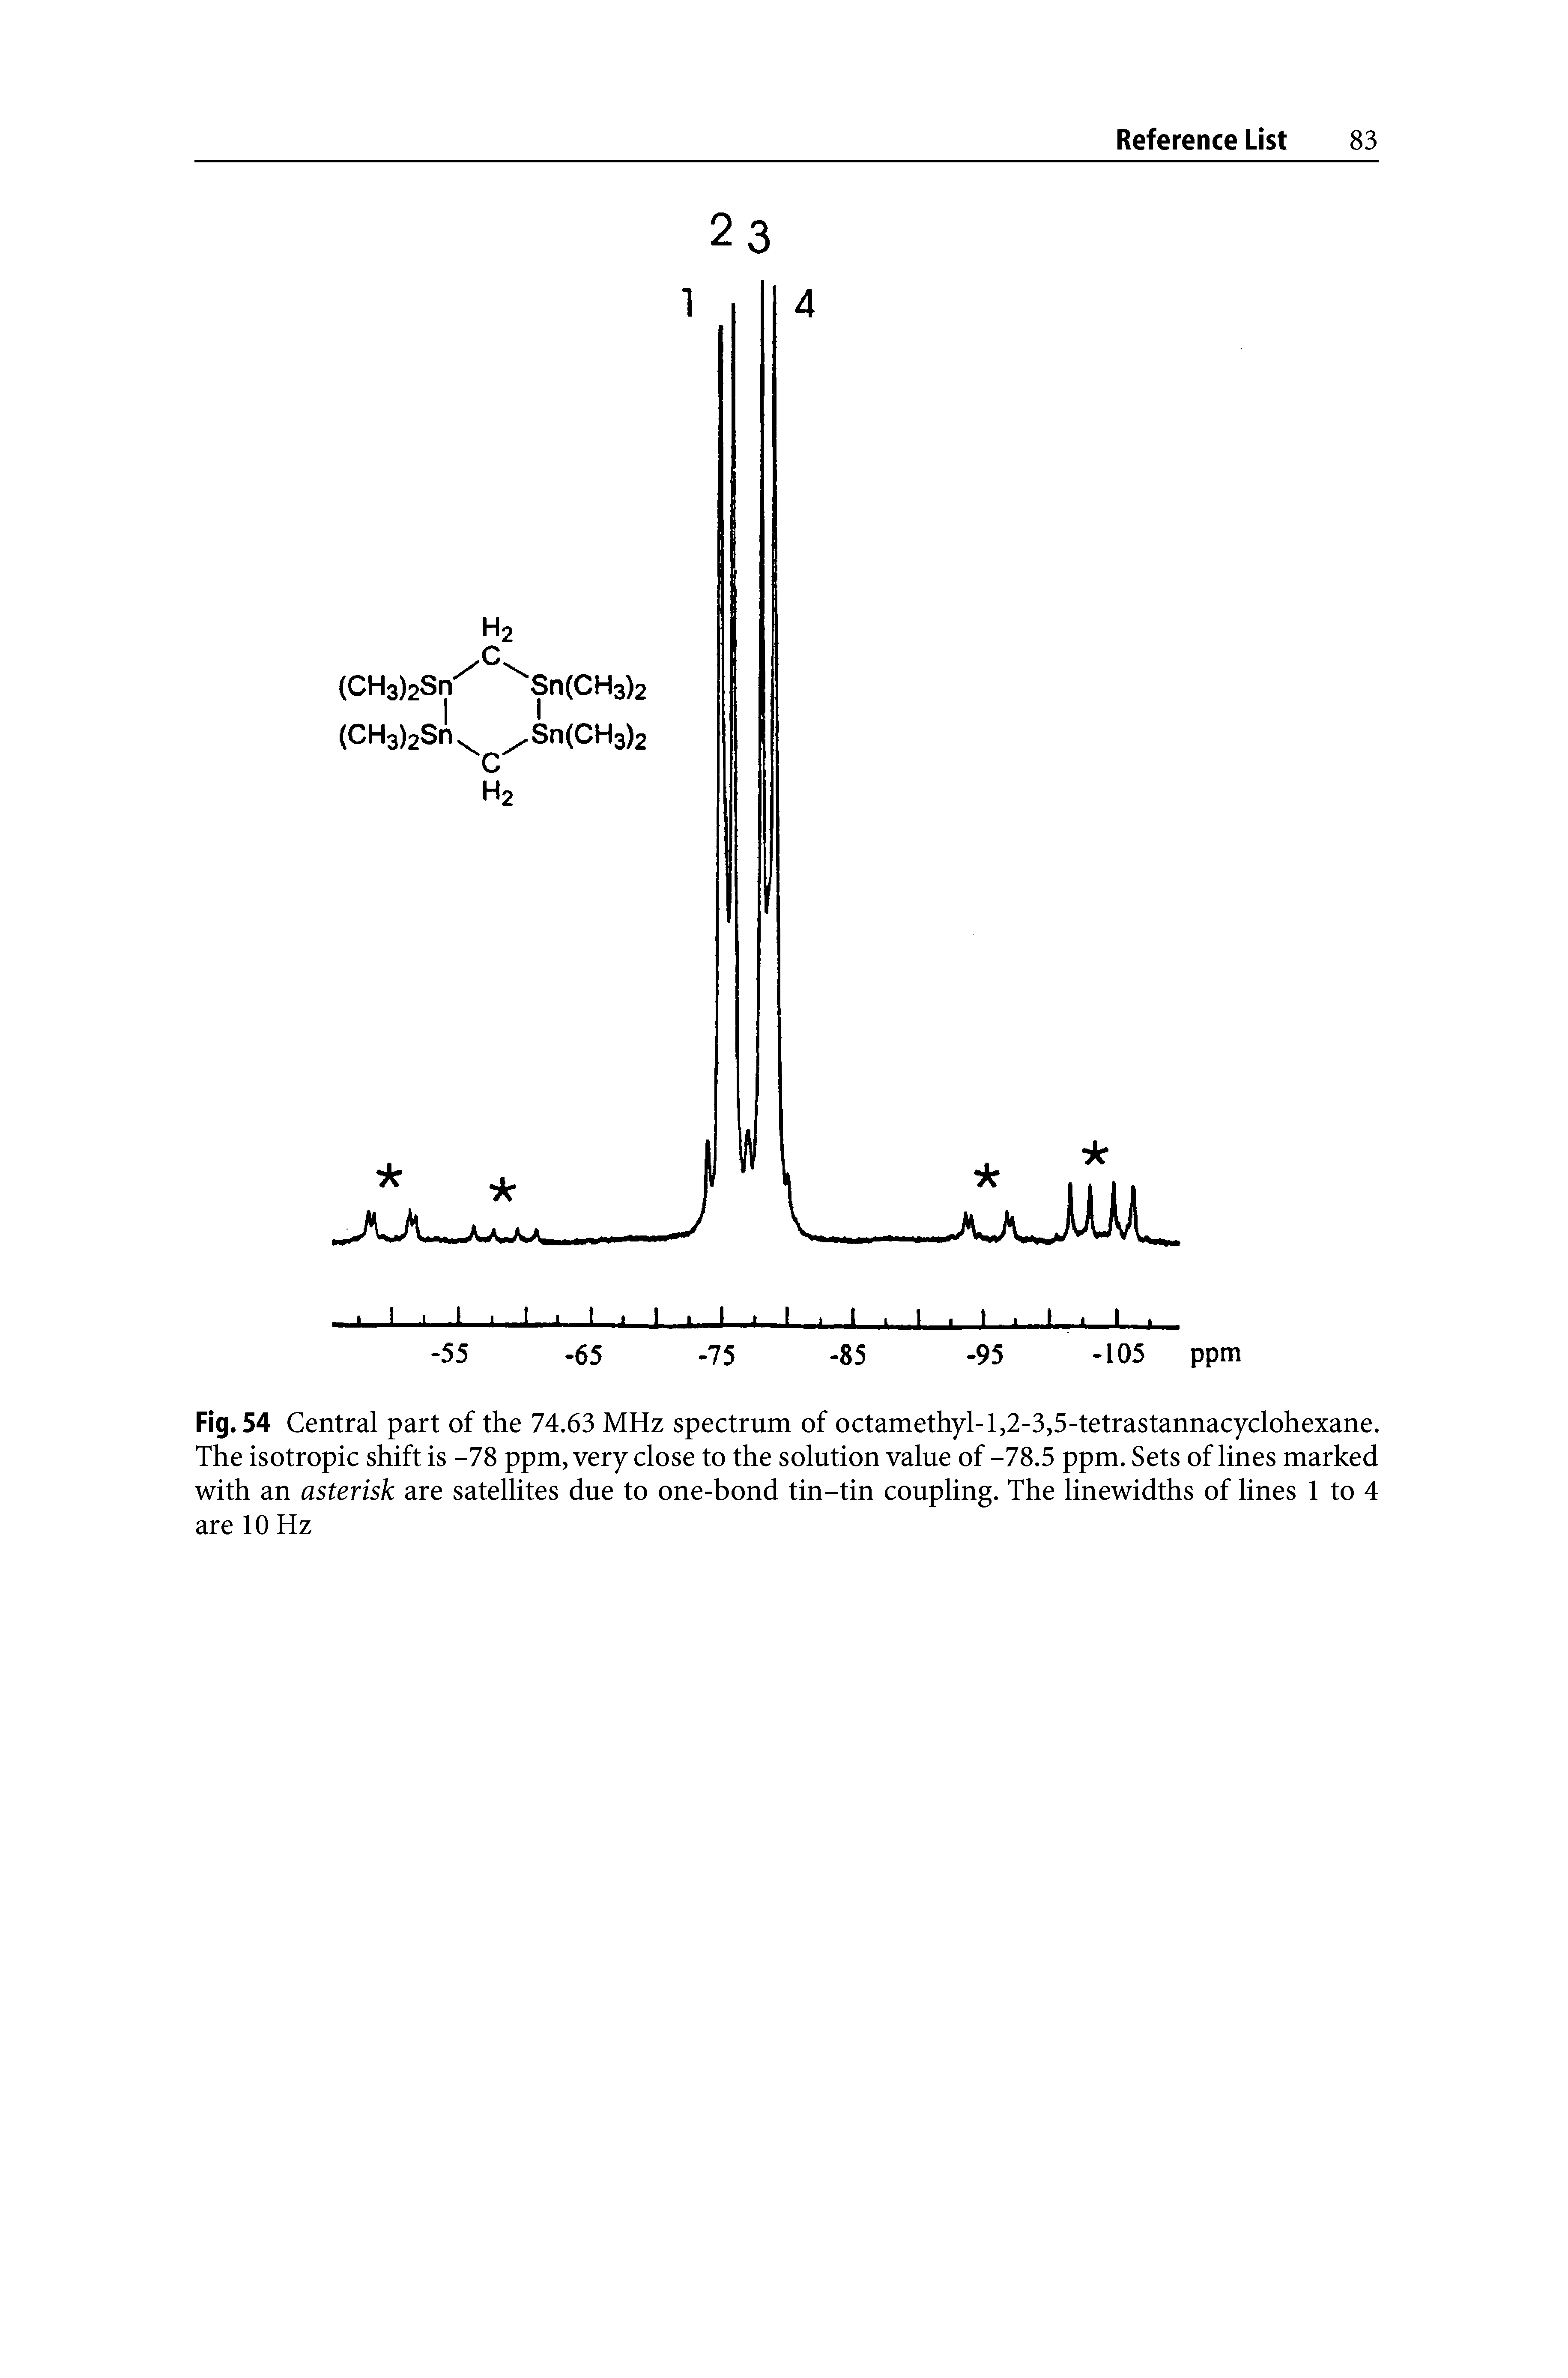 Fig. 54 Central part of the 74.63 MHz spectrum of octamethyl-l,2-3,5-tetrastannacyclohexane. The isotropic shift is -78 ppm, very close to the solution value of -78.5 ppm. Sets of lines marked with an asterisk are satellites due to one-bond tin-tin coupling. The linewidths of lines 1 to 4 are 10 Hz...